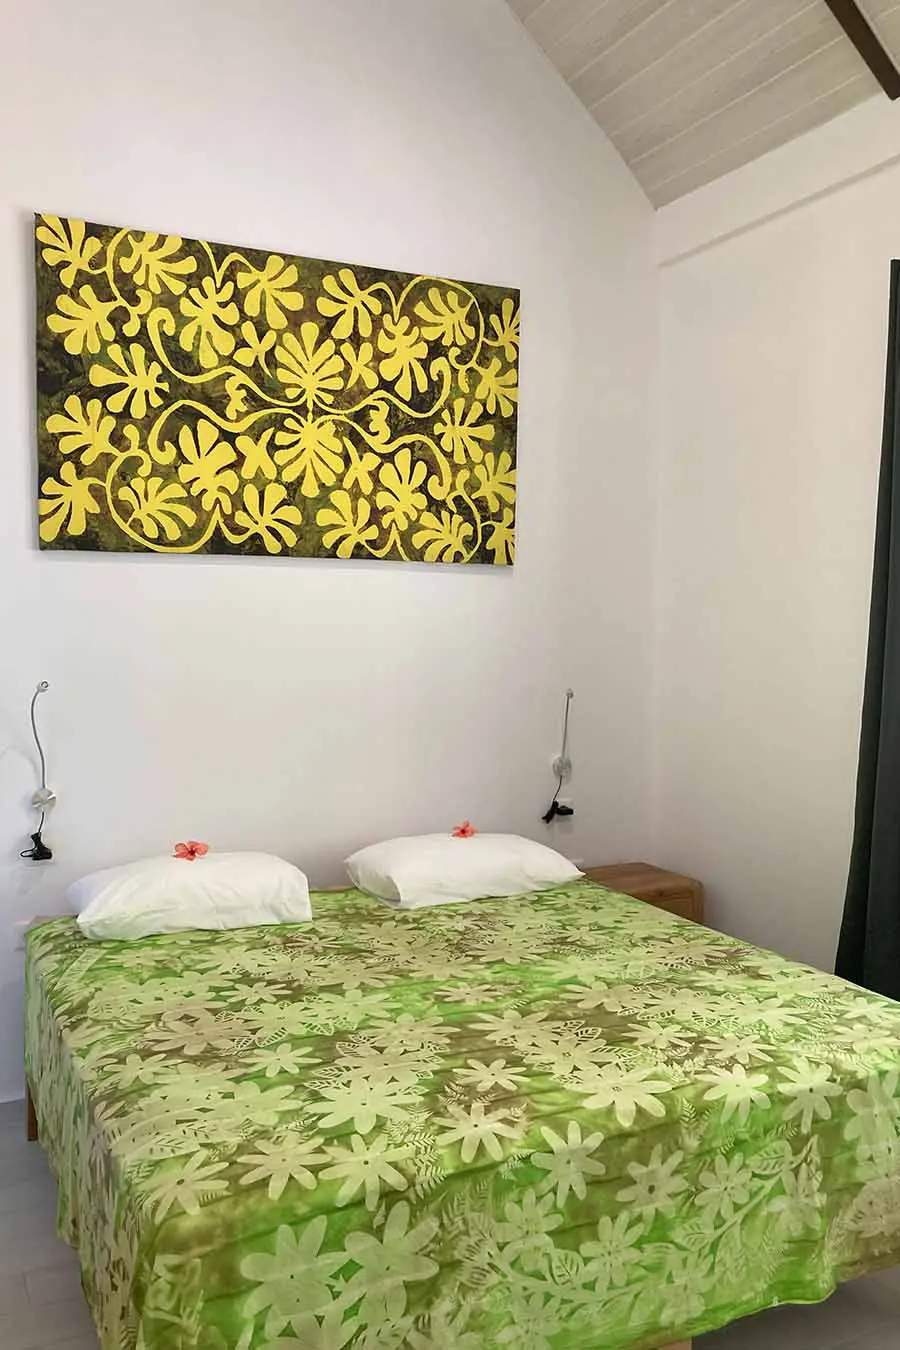 Double bed with artwork on the wall in our vacation home in Bora Bora